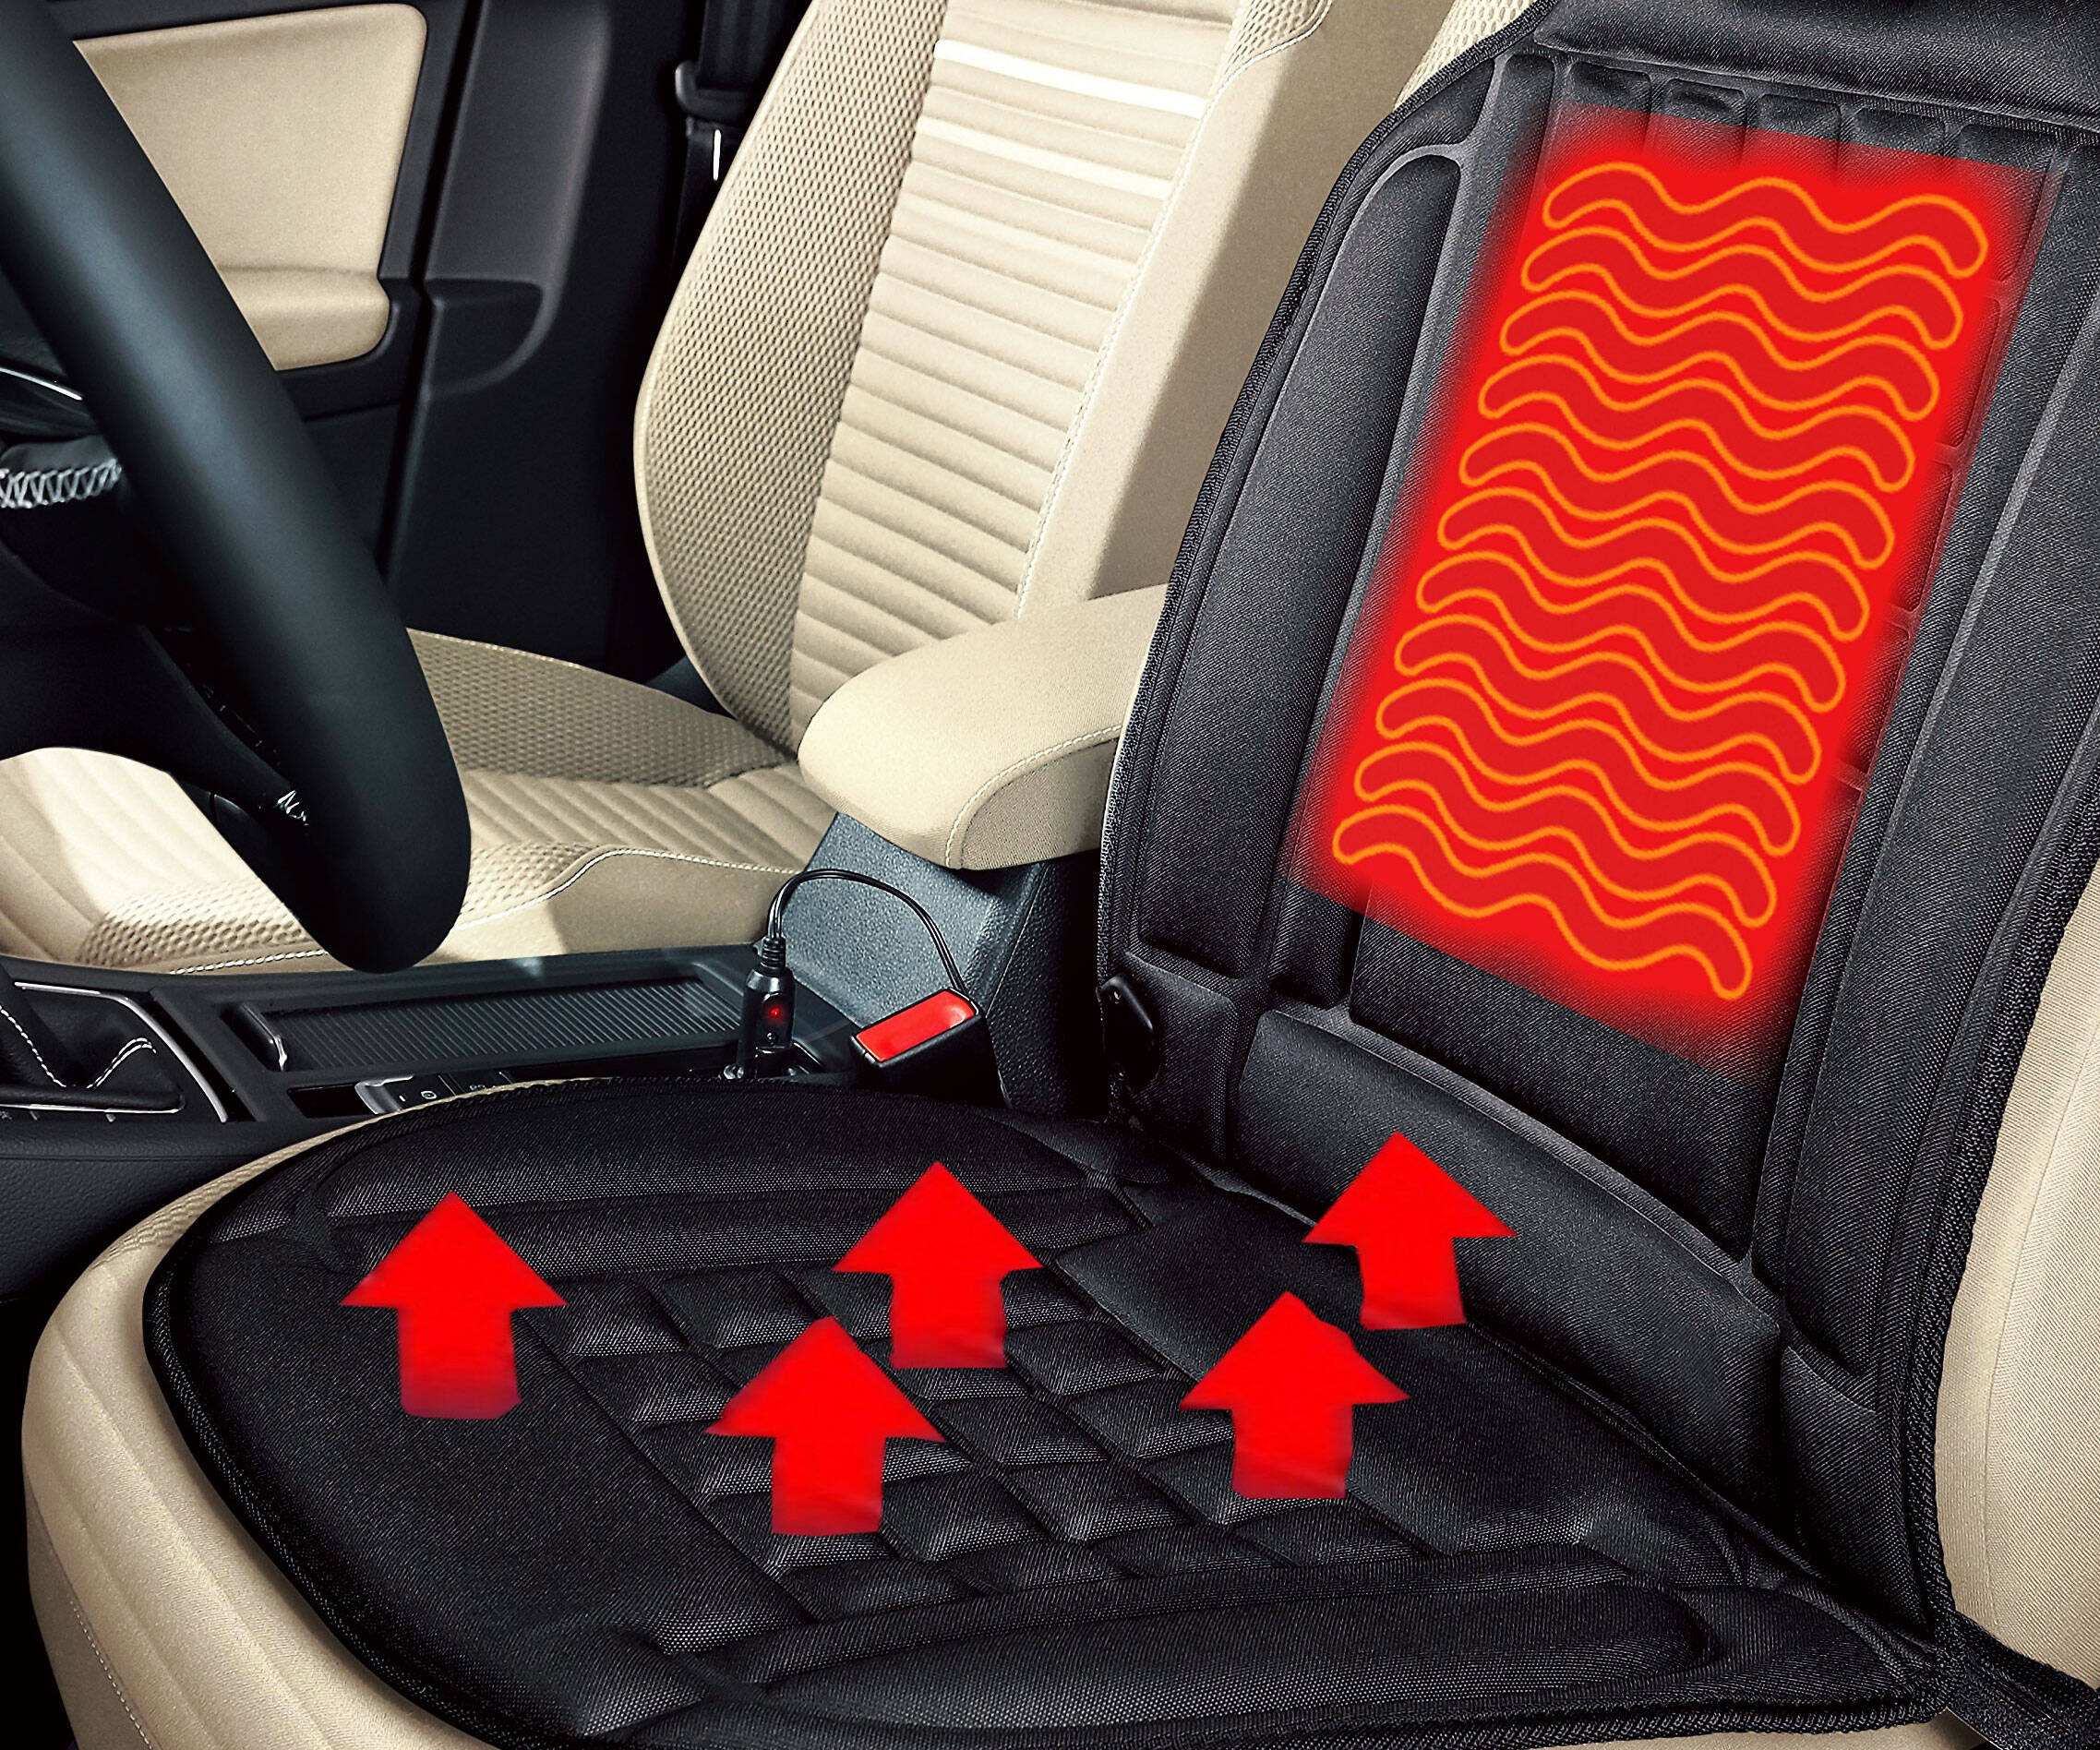 Heated Car Seat Cover - //coolthings.us